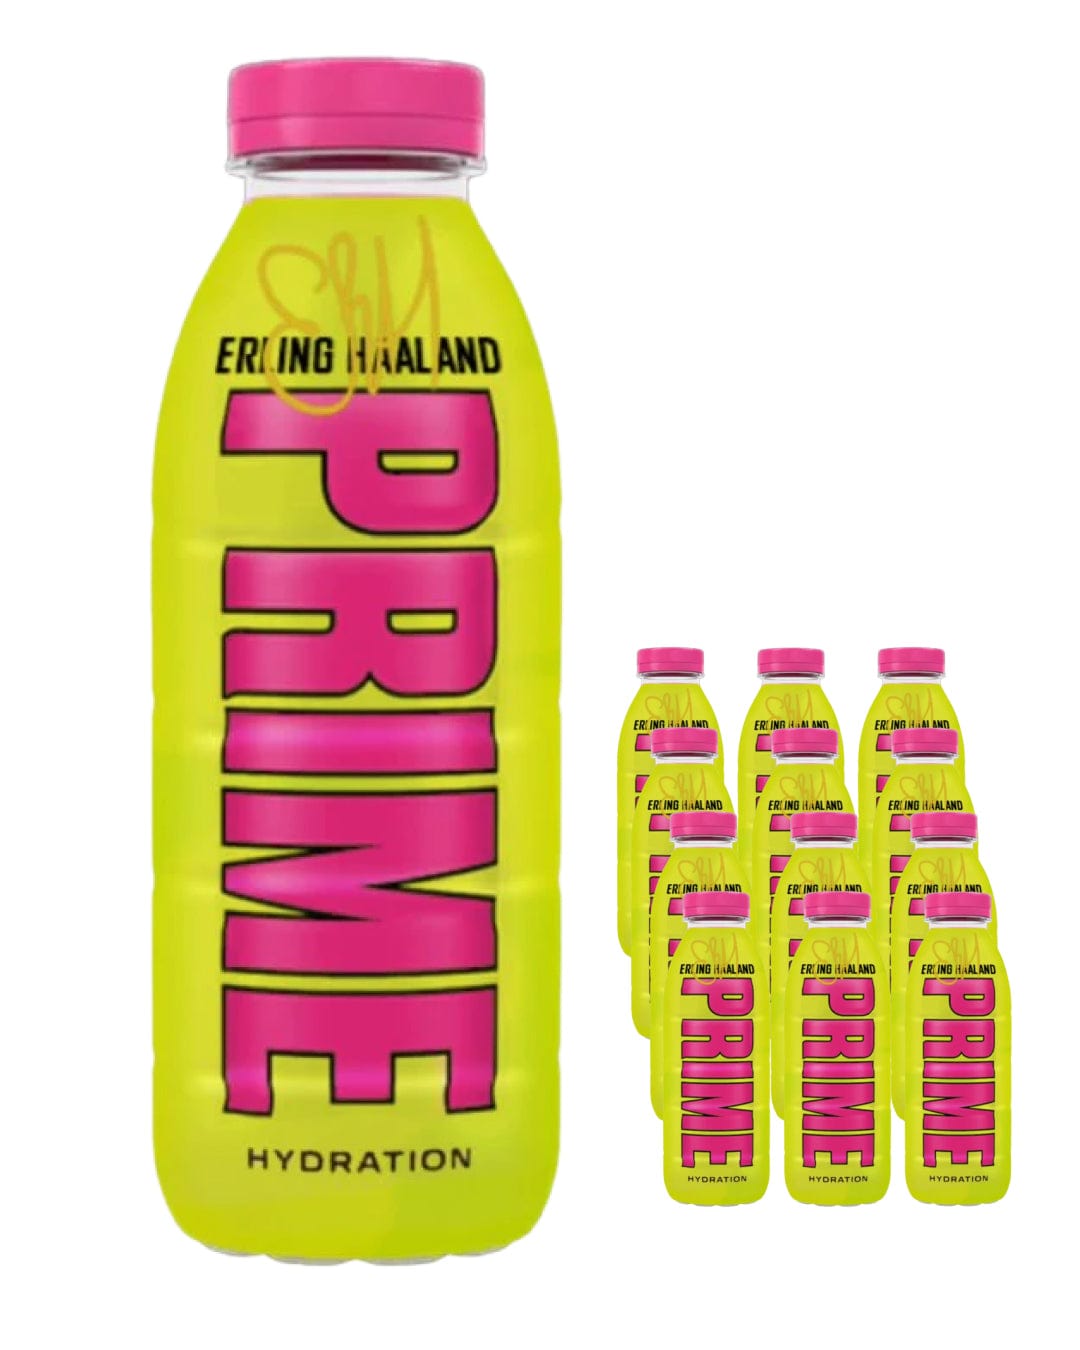 Prime Hydration Erling Haaland Hydration Drink Multipack, 12 x 500 ml Soft Drinks & Mixers